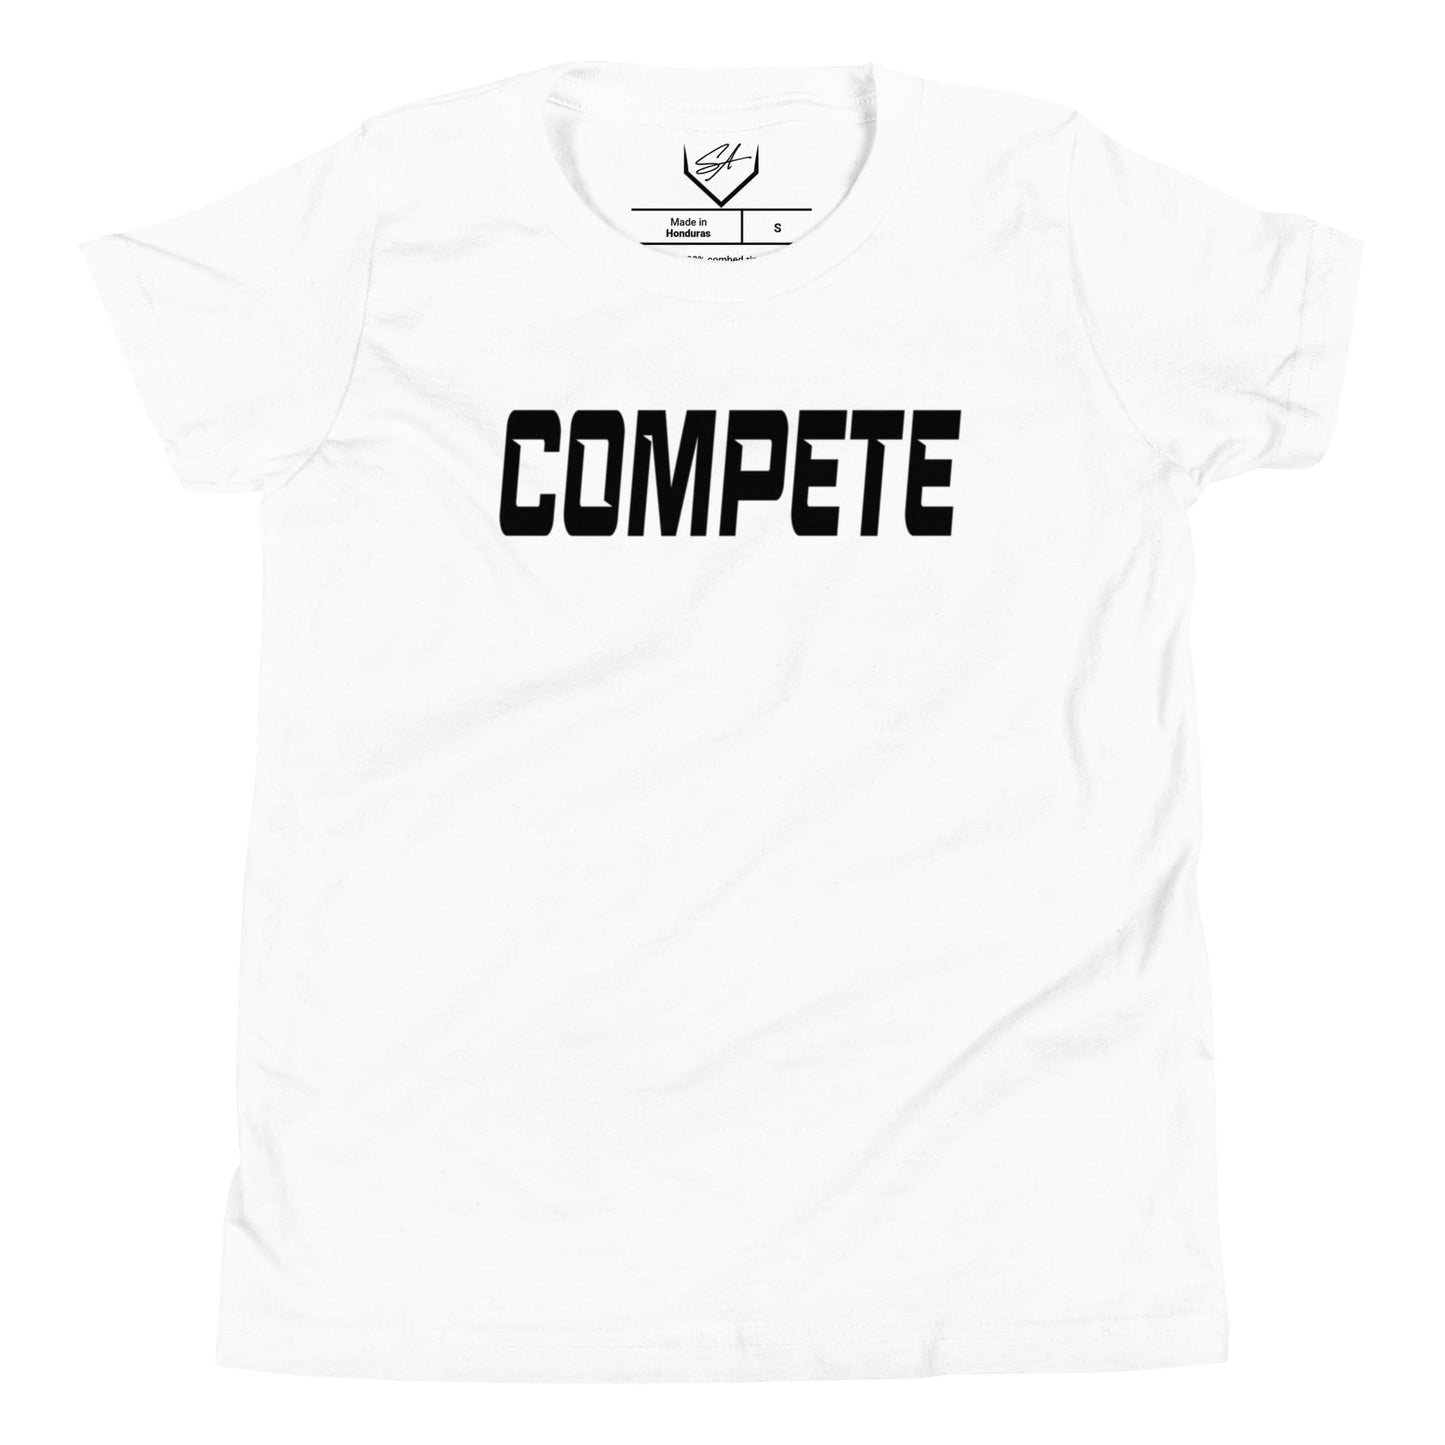 Compete - Youth Tee